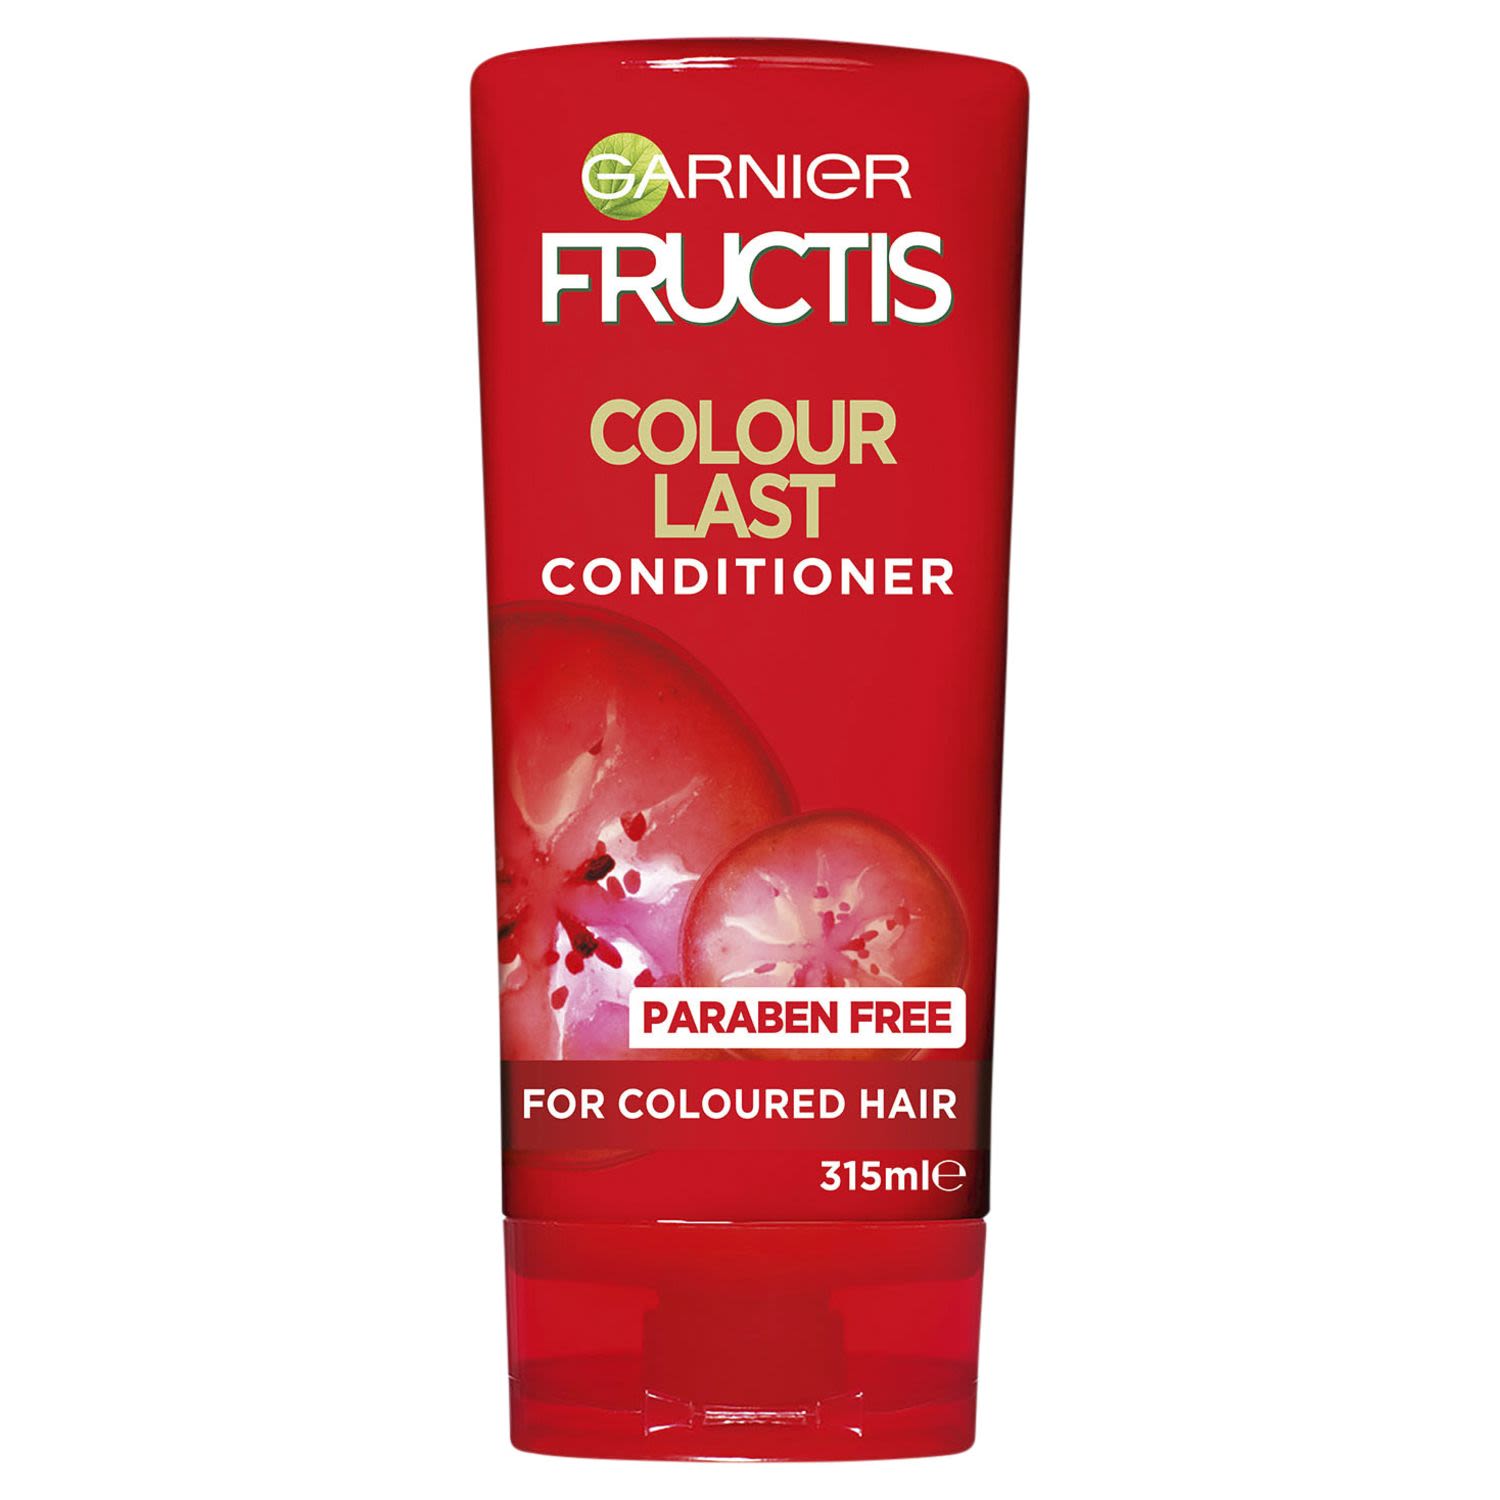 Garnier Fructis Colour Last Conditioner to Protect Coloured Hair, 315 Millilitre